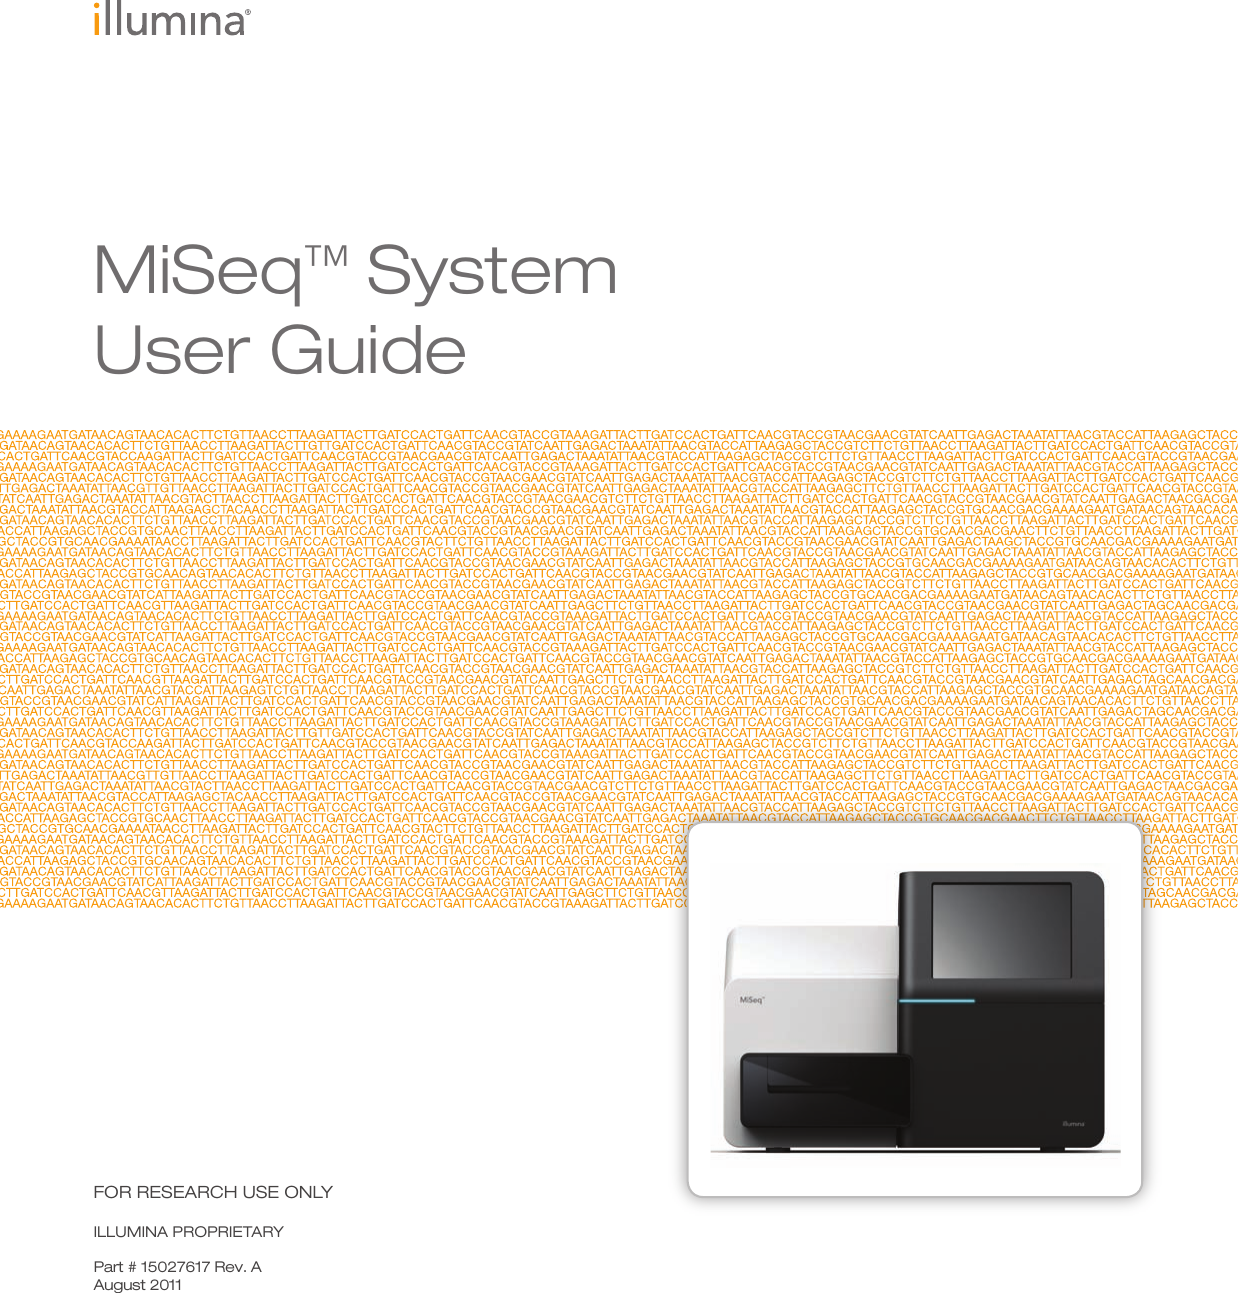 FOR RESEARCH USE ONLYILLUMINA PROPRIETARY Part # 15027617 Rev. AAugust 2011MiSeq™ SystemUser Guide